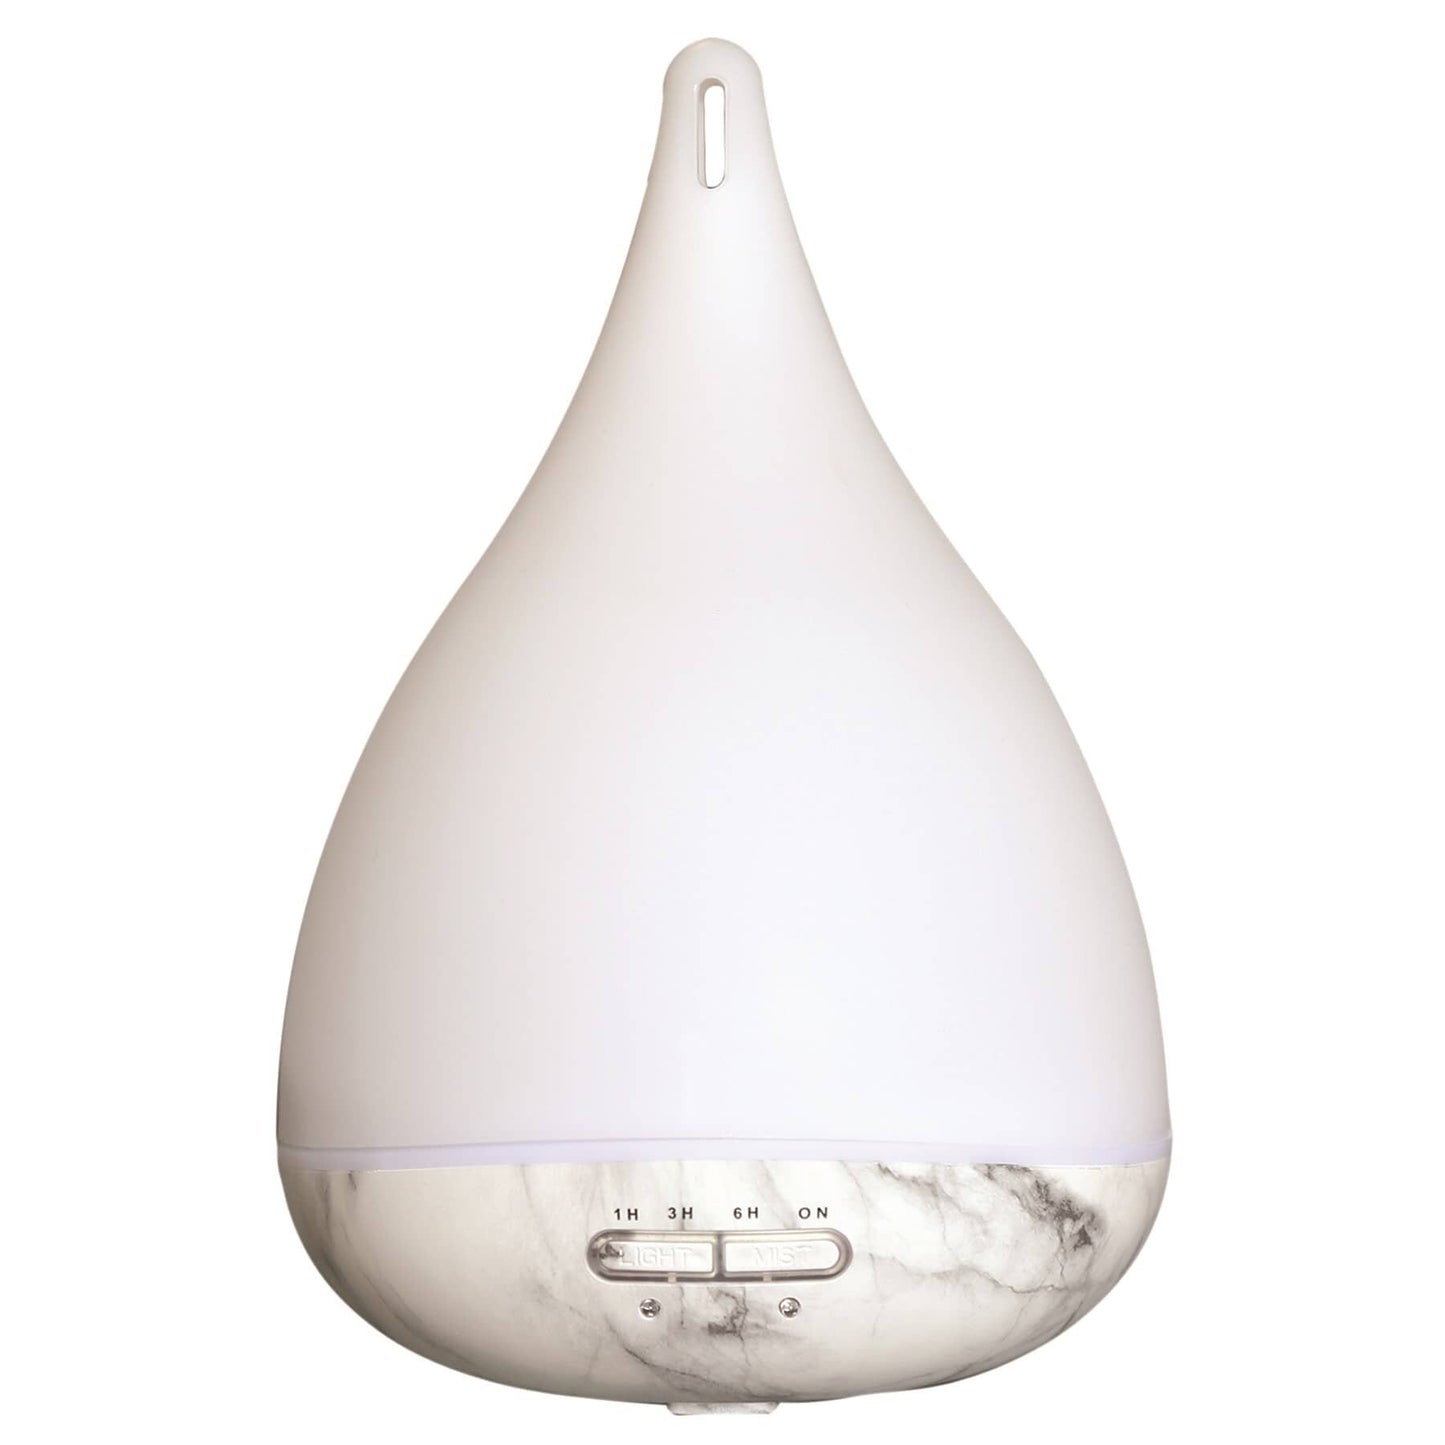 Marble & White LED Ultrasonic Aroma Diffuser AR1524